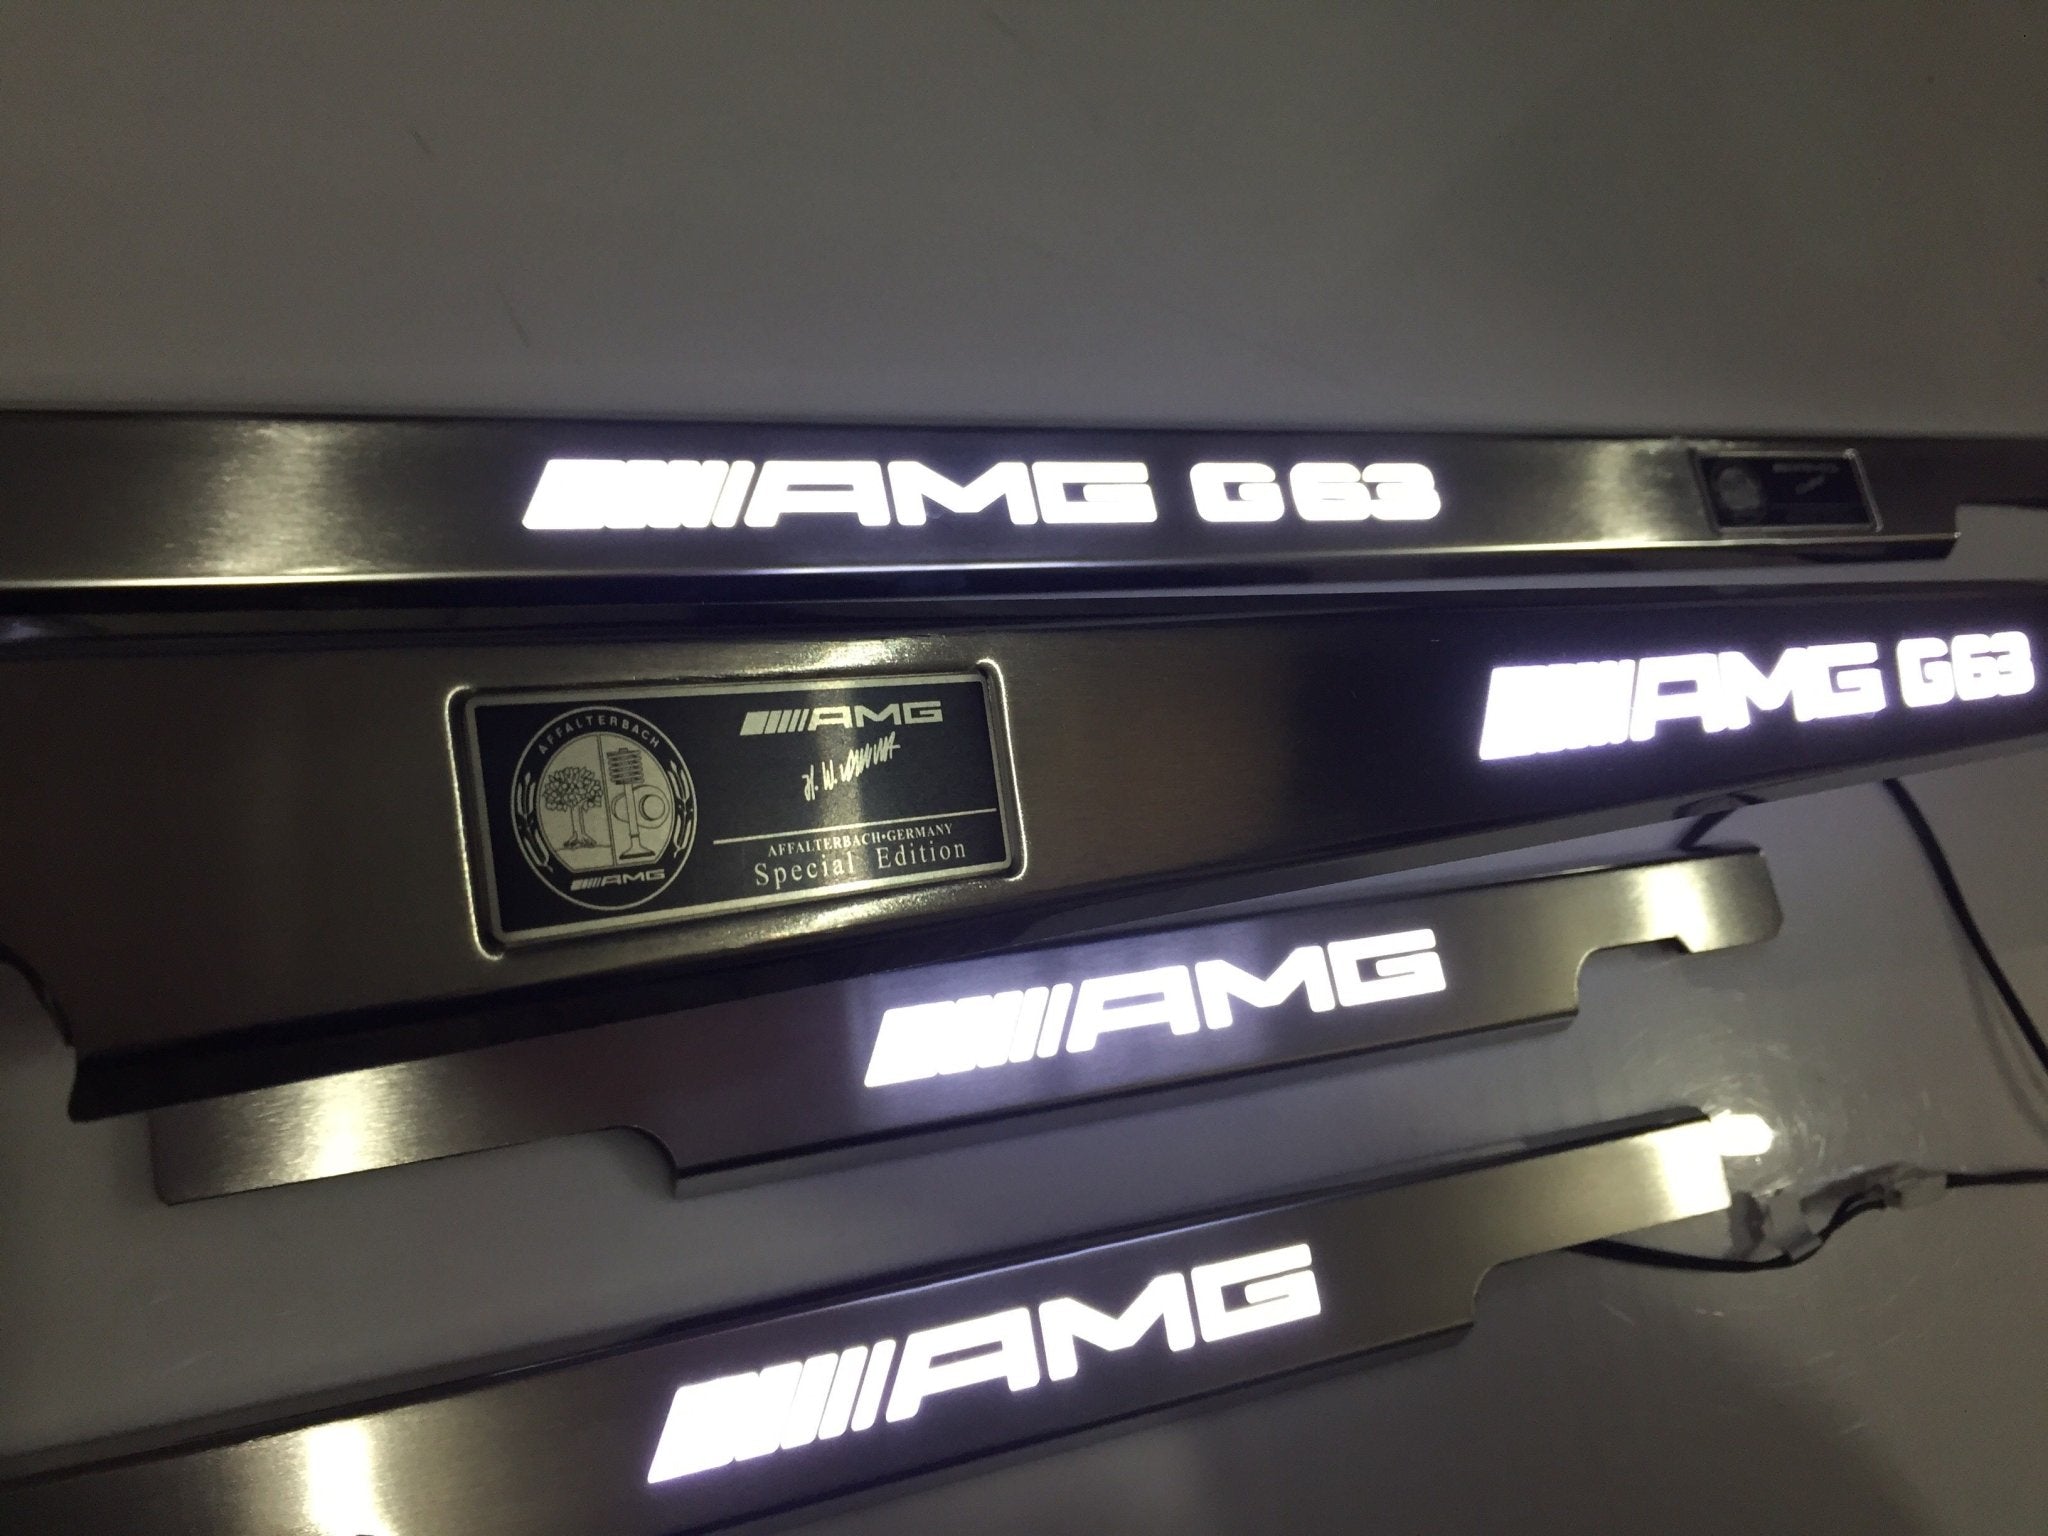 AMG G63 LED Illuminated Door Sills 4 or 5 pcs for Mercedes-Benz G-Class W463